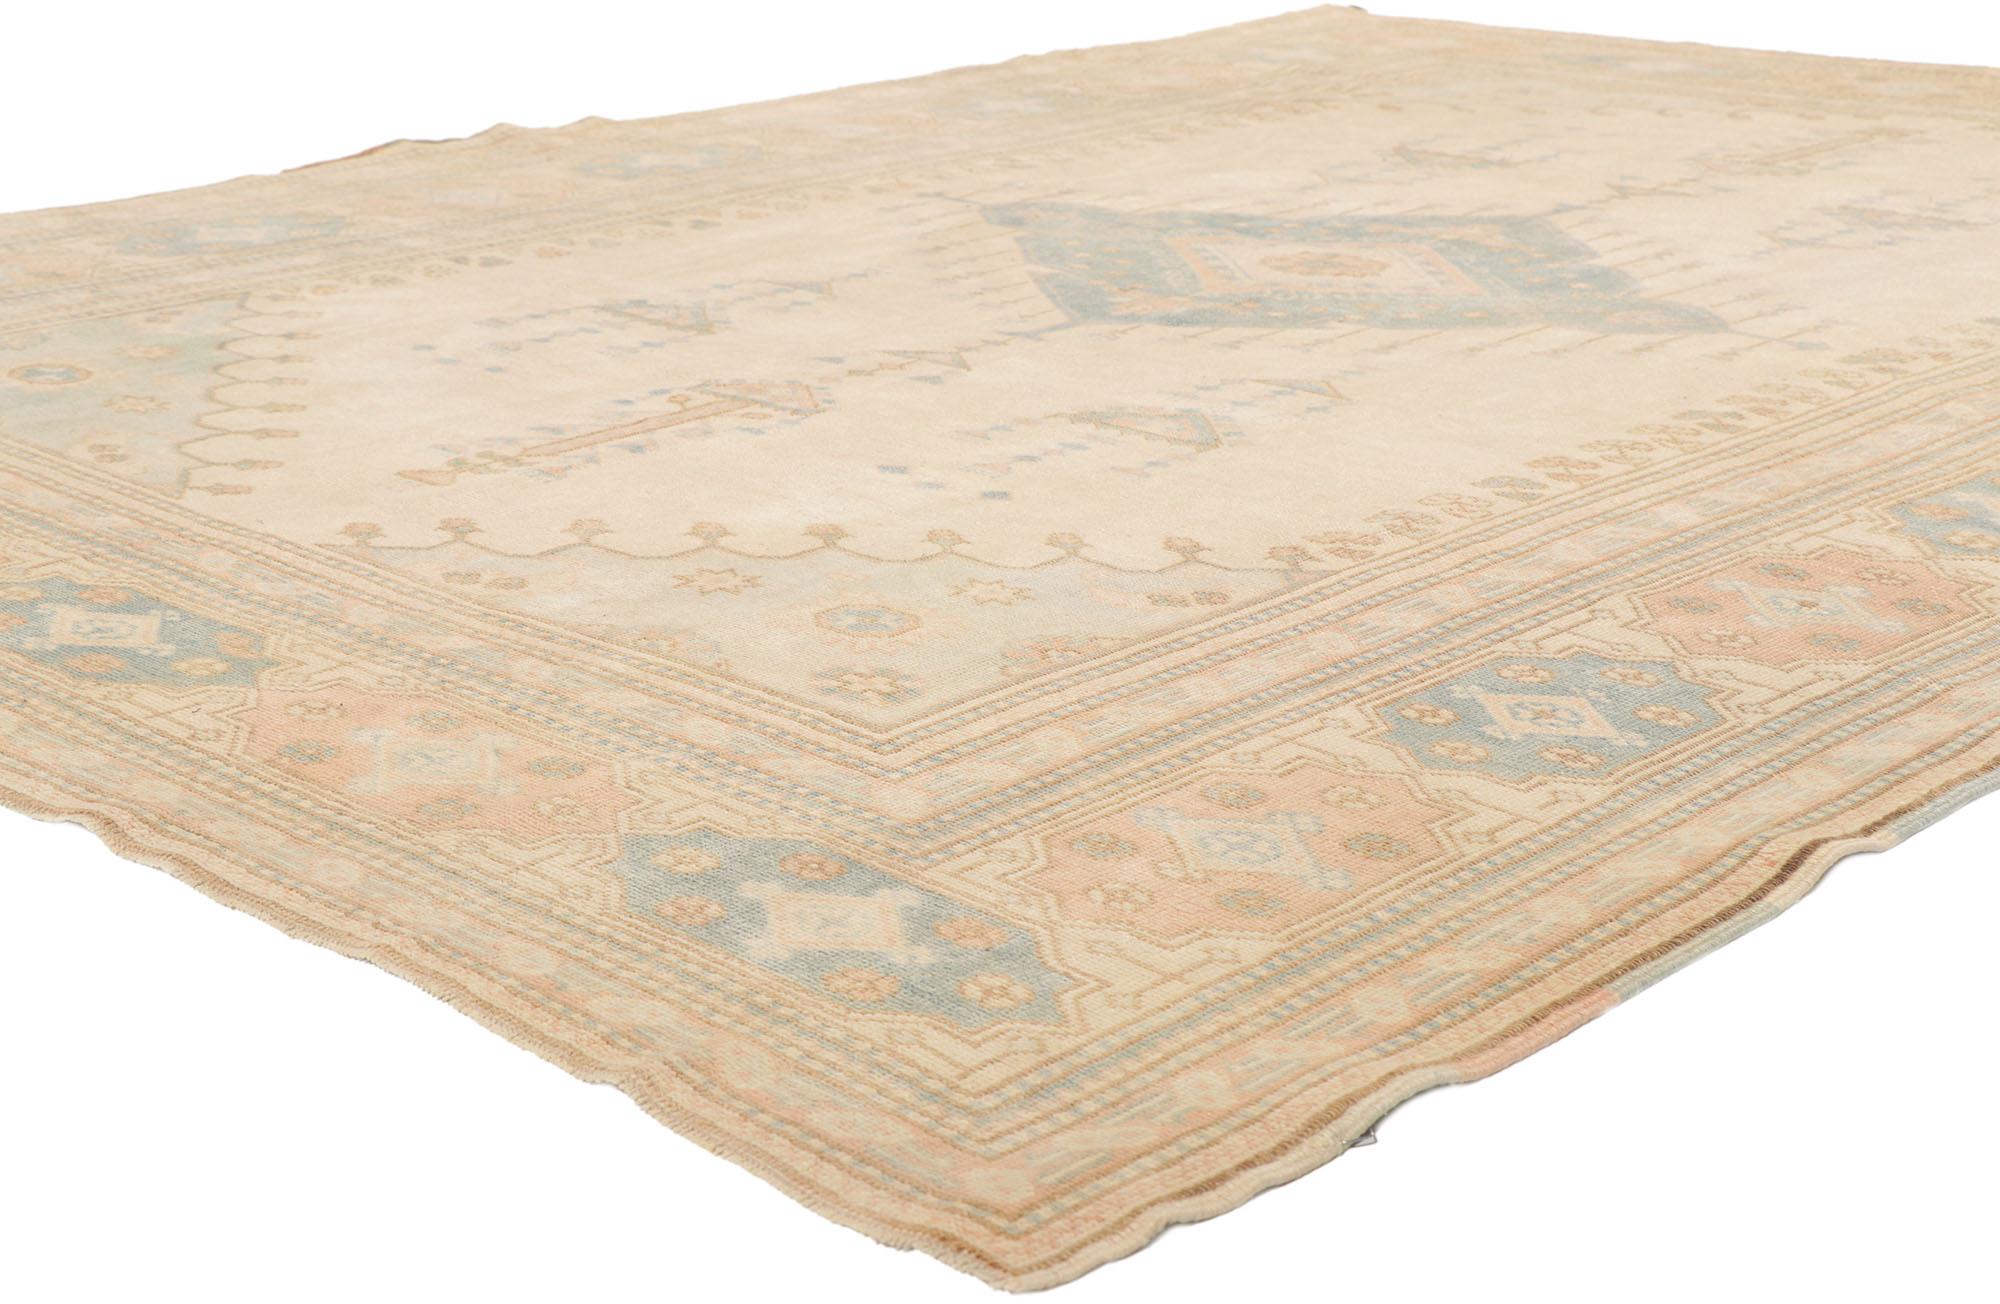 53728 vintage Turkish Oushak rug with Boho Tribal Style 7'00 x 9'04. Full of tiny details and an expressive tribal design combined with soft pastel colors, this hand-knotted wool vintage Turkish Oushak rug is a captivating vision of woven beauty.